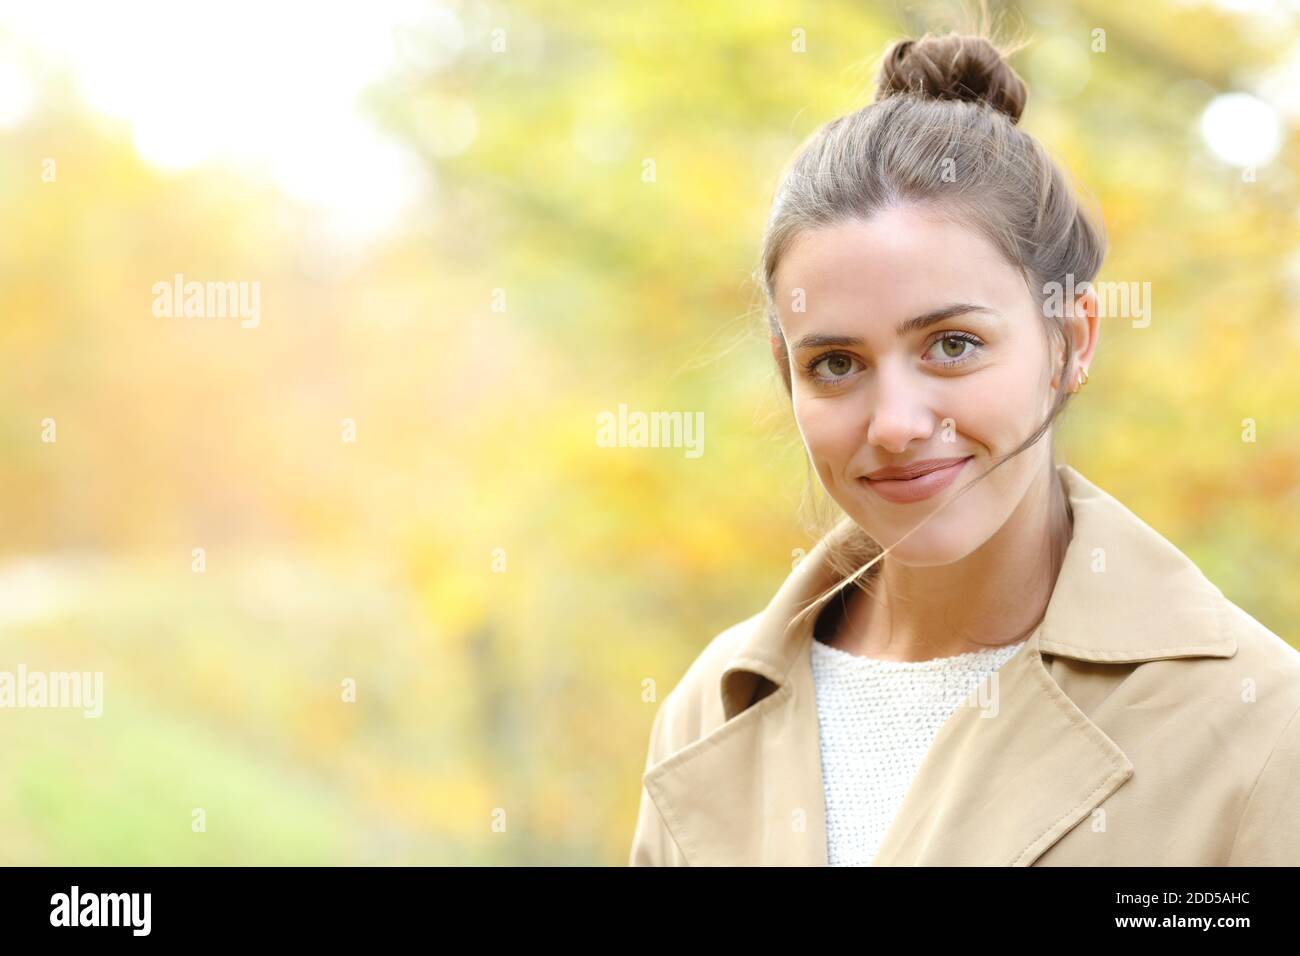 Portrait of a happy woman looking at camera in a park in autumn Stock Photo